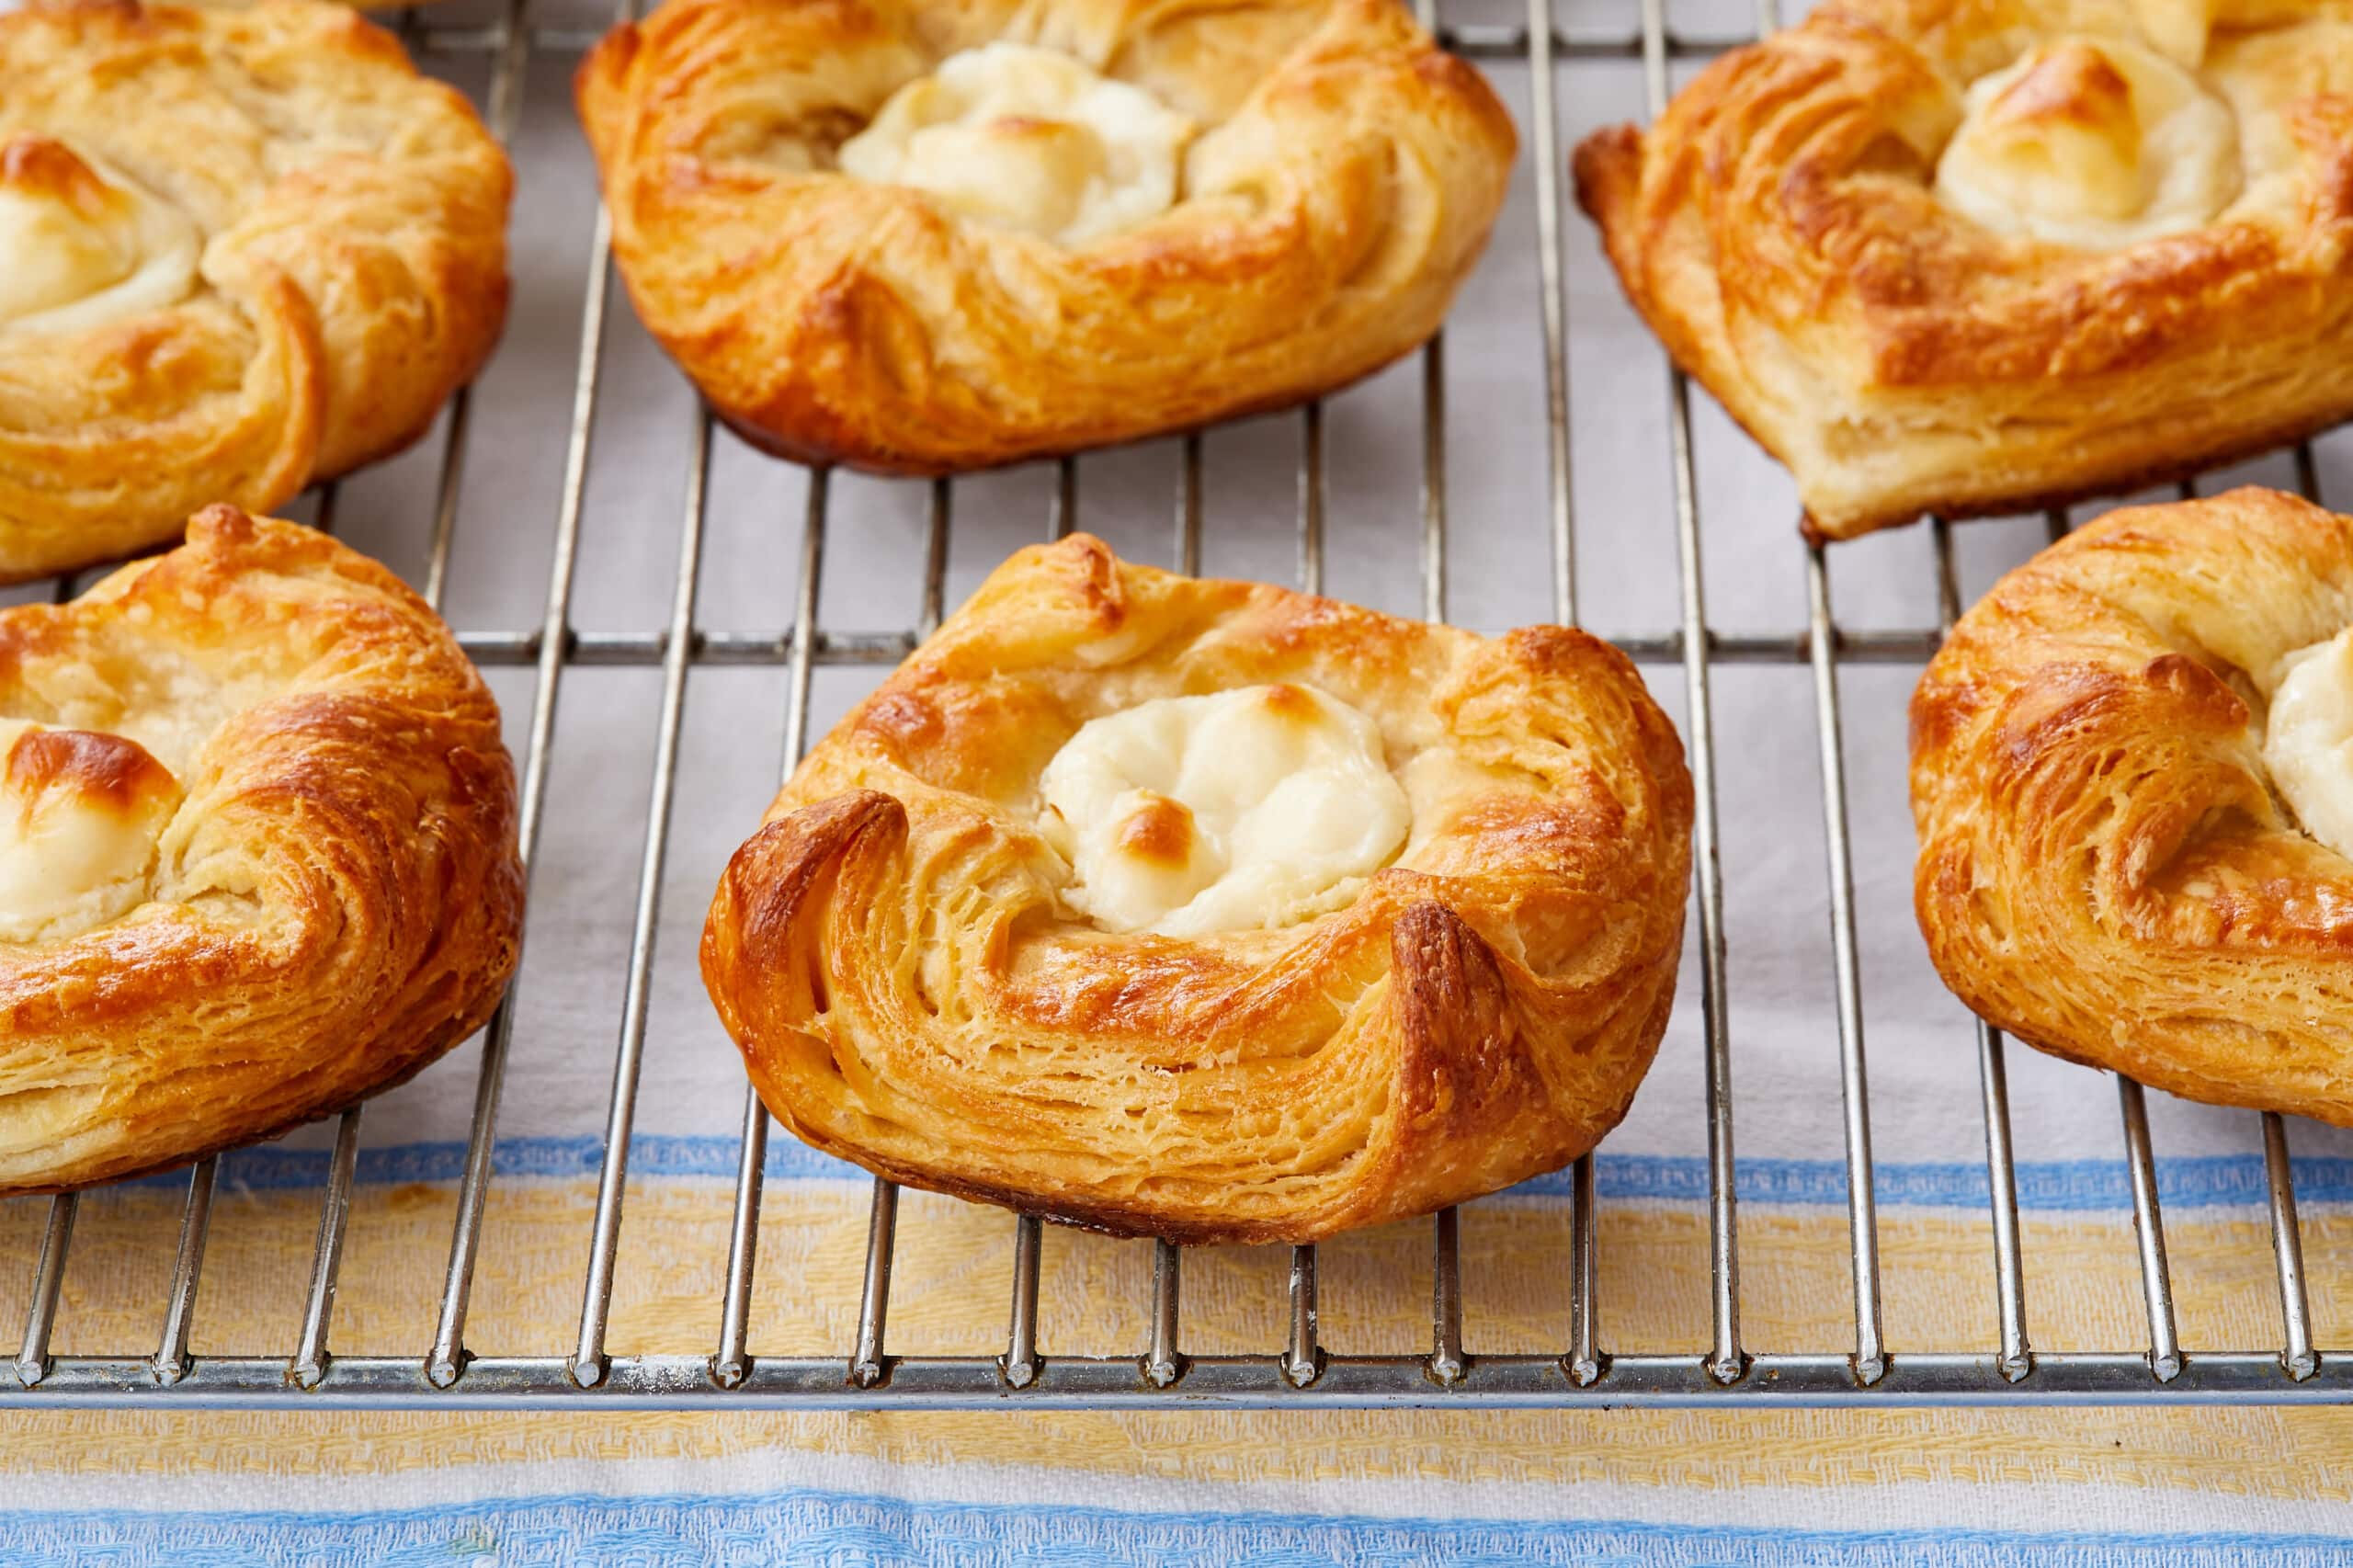 Cheese Danish are golden brown with flaky layers.